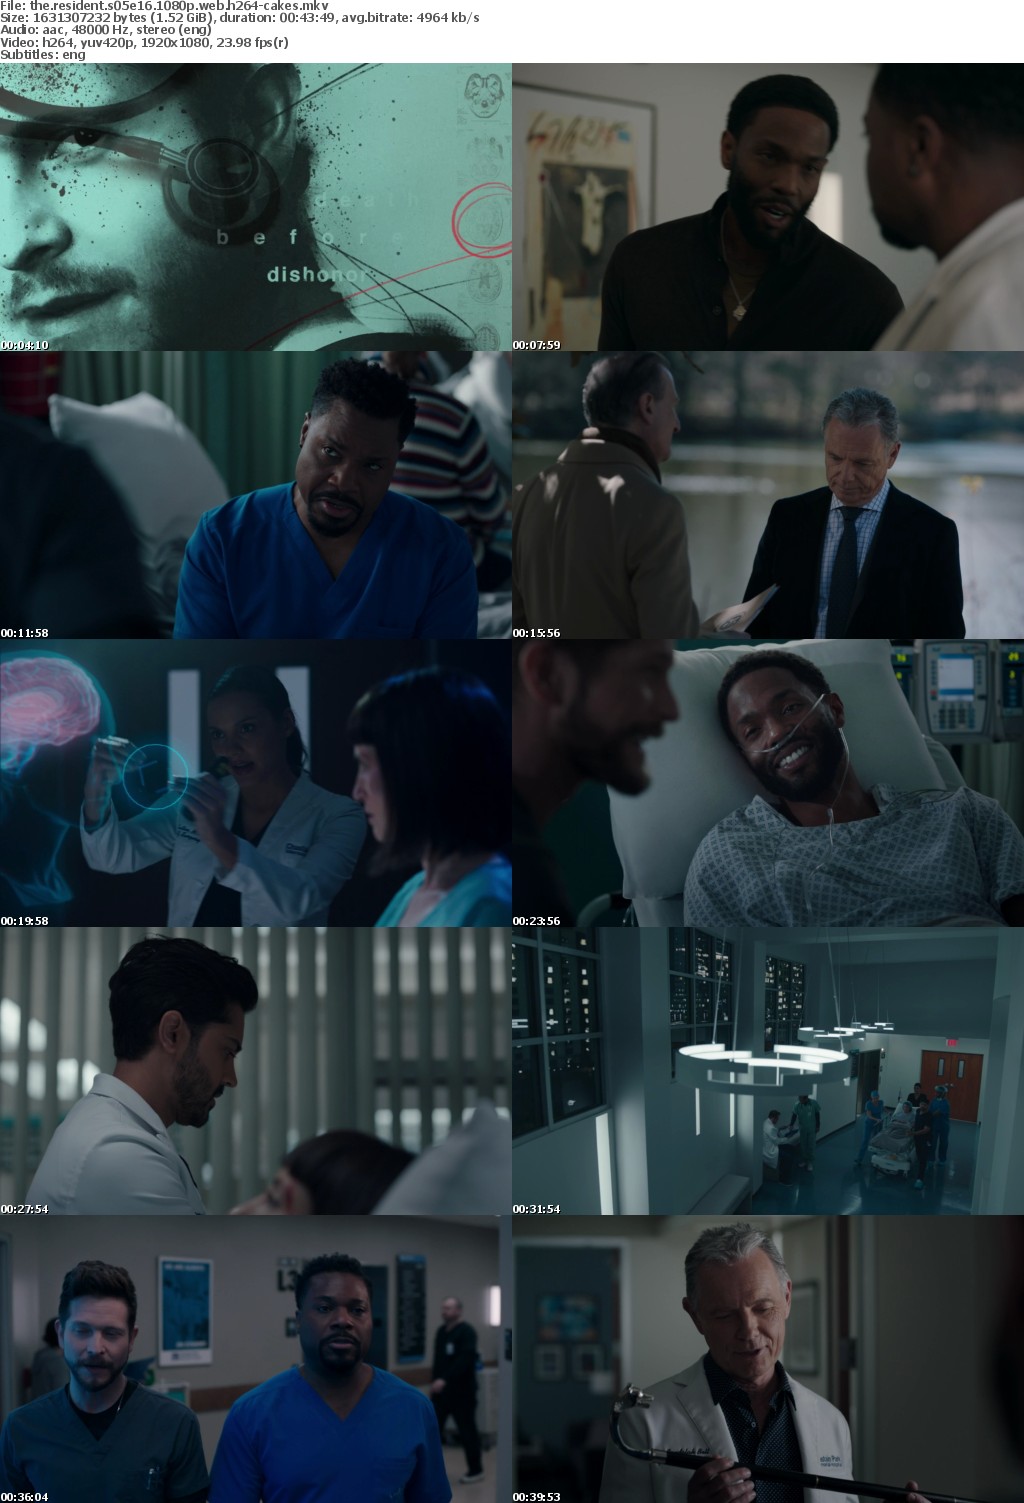 The Resident S05E16 1080p WEB H264-CAKES